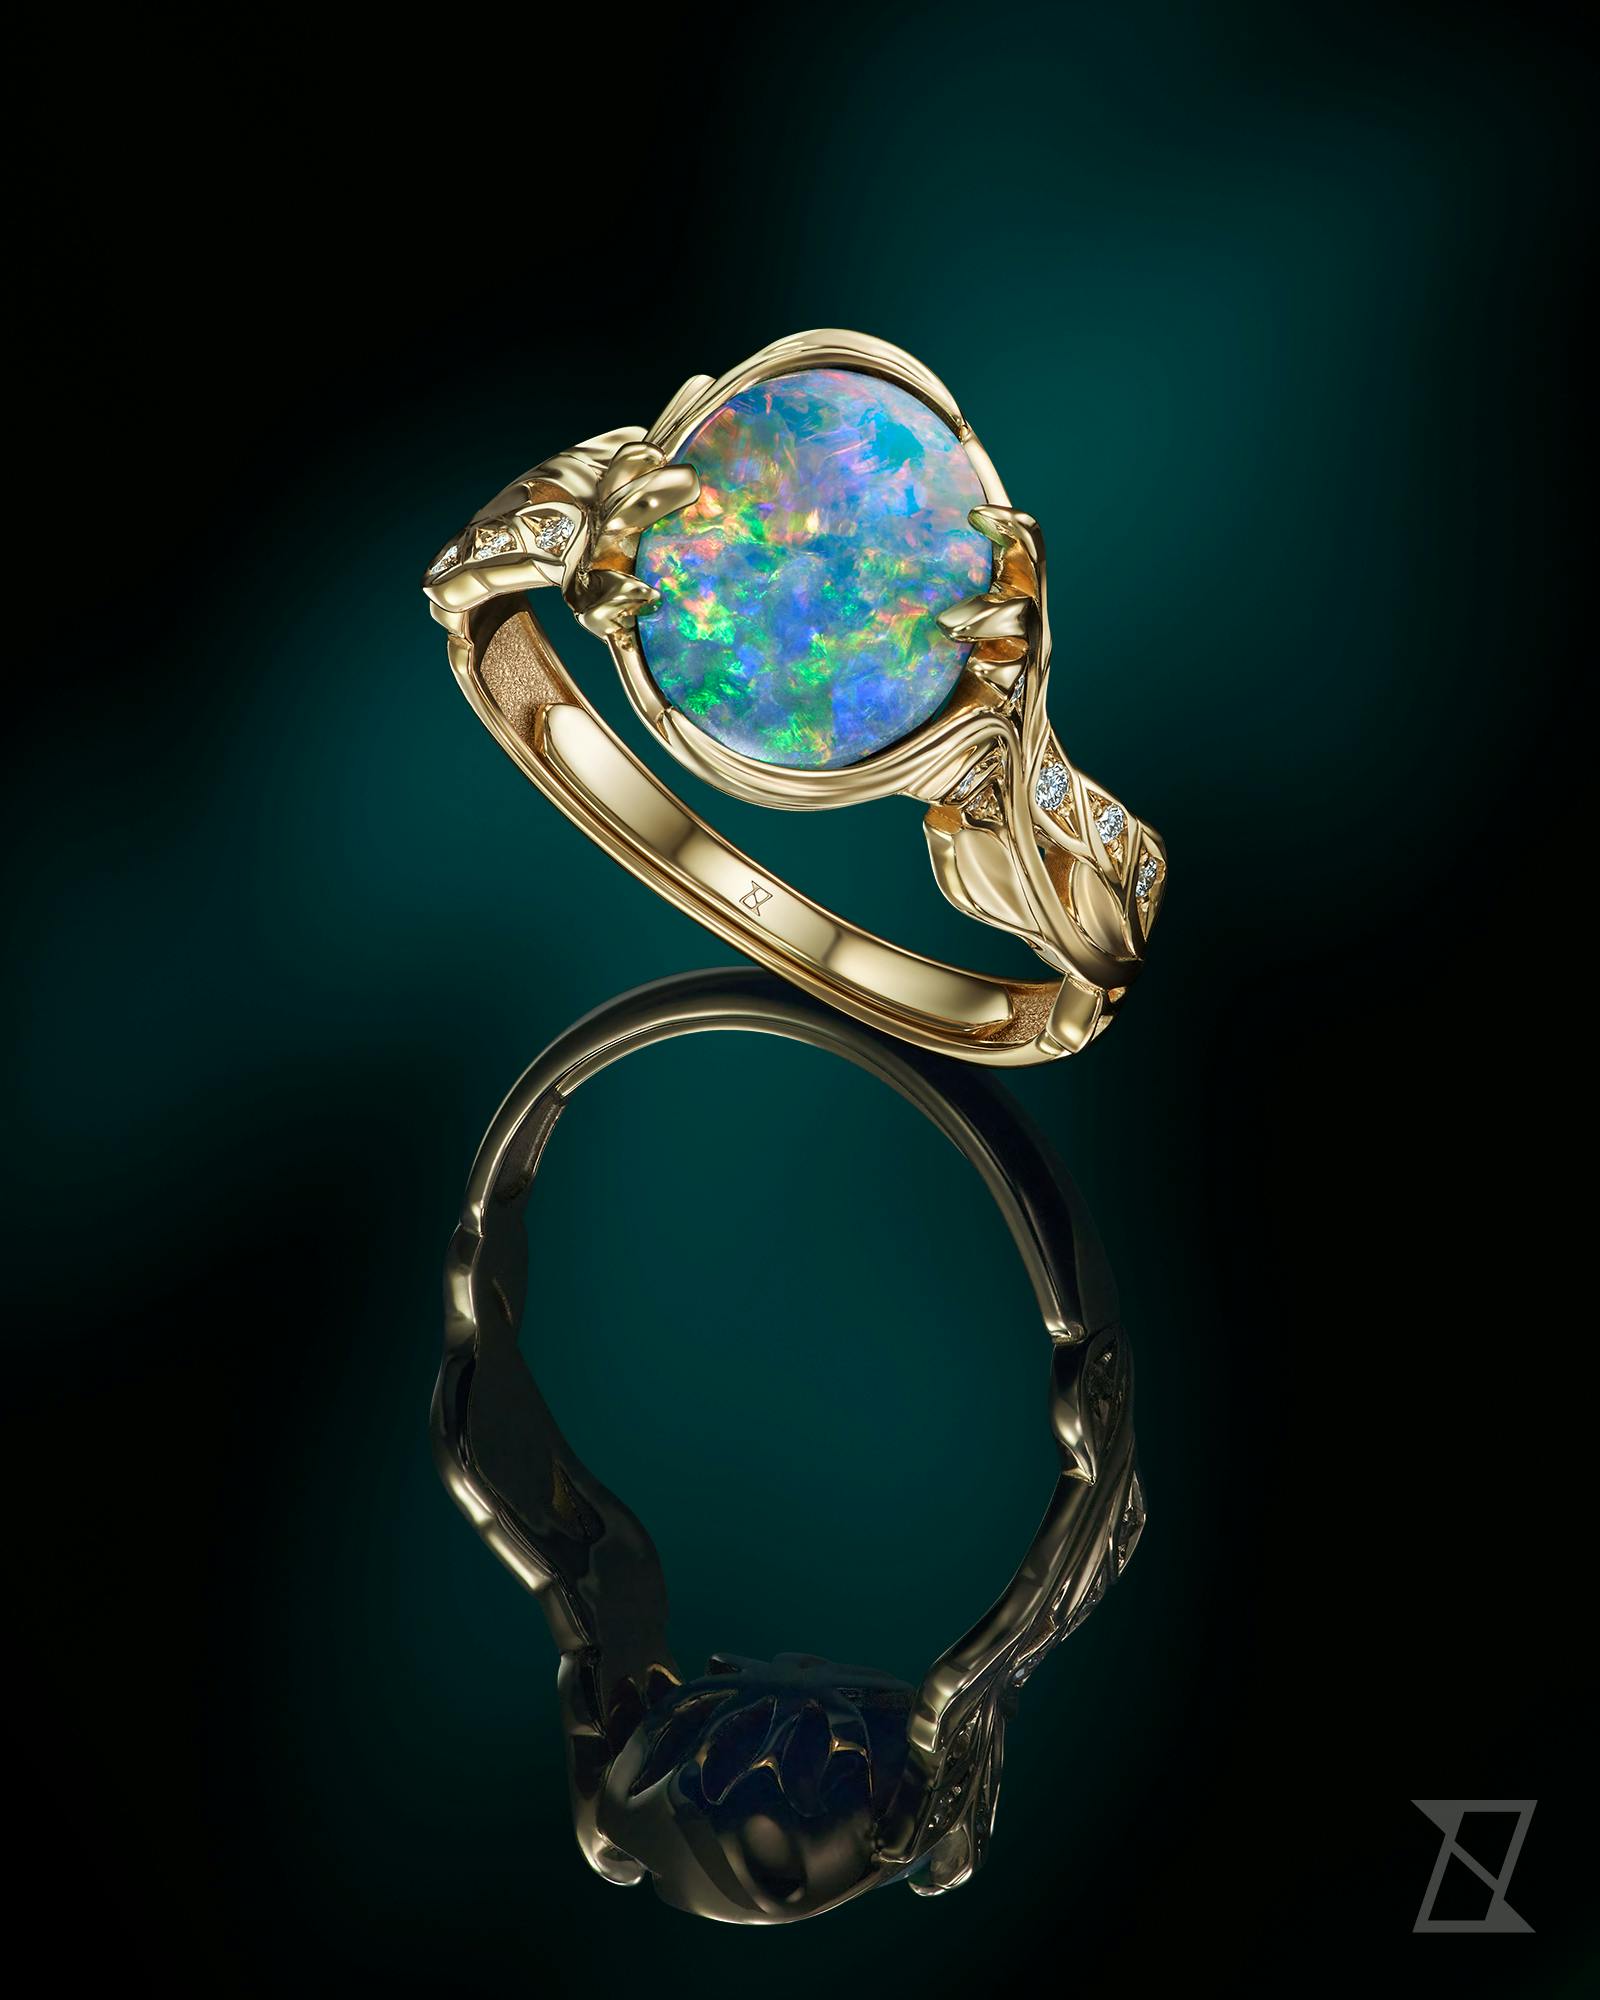 Luxury engagement ring with opal and diamonds